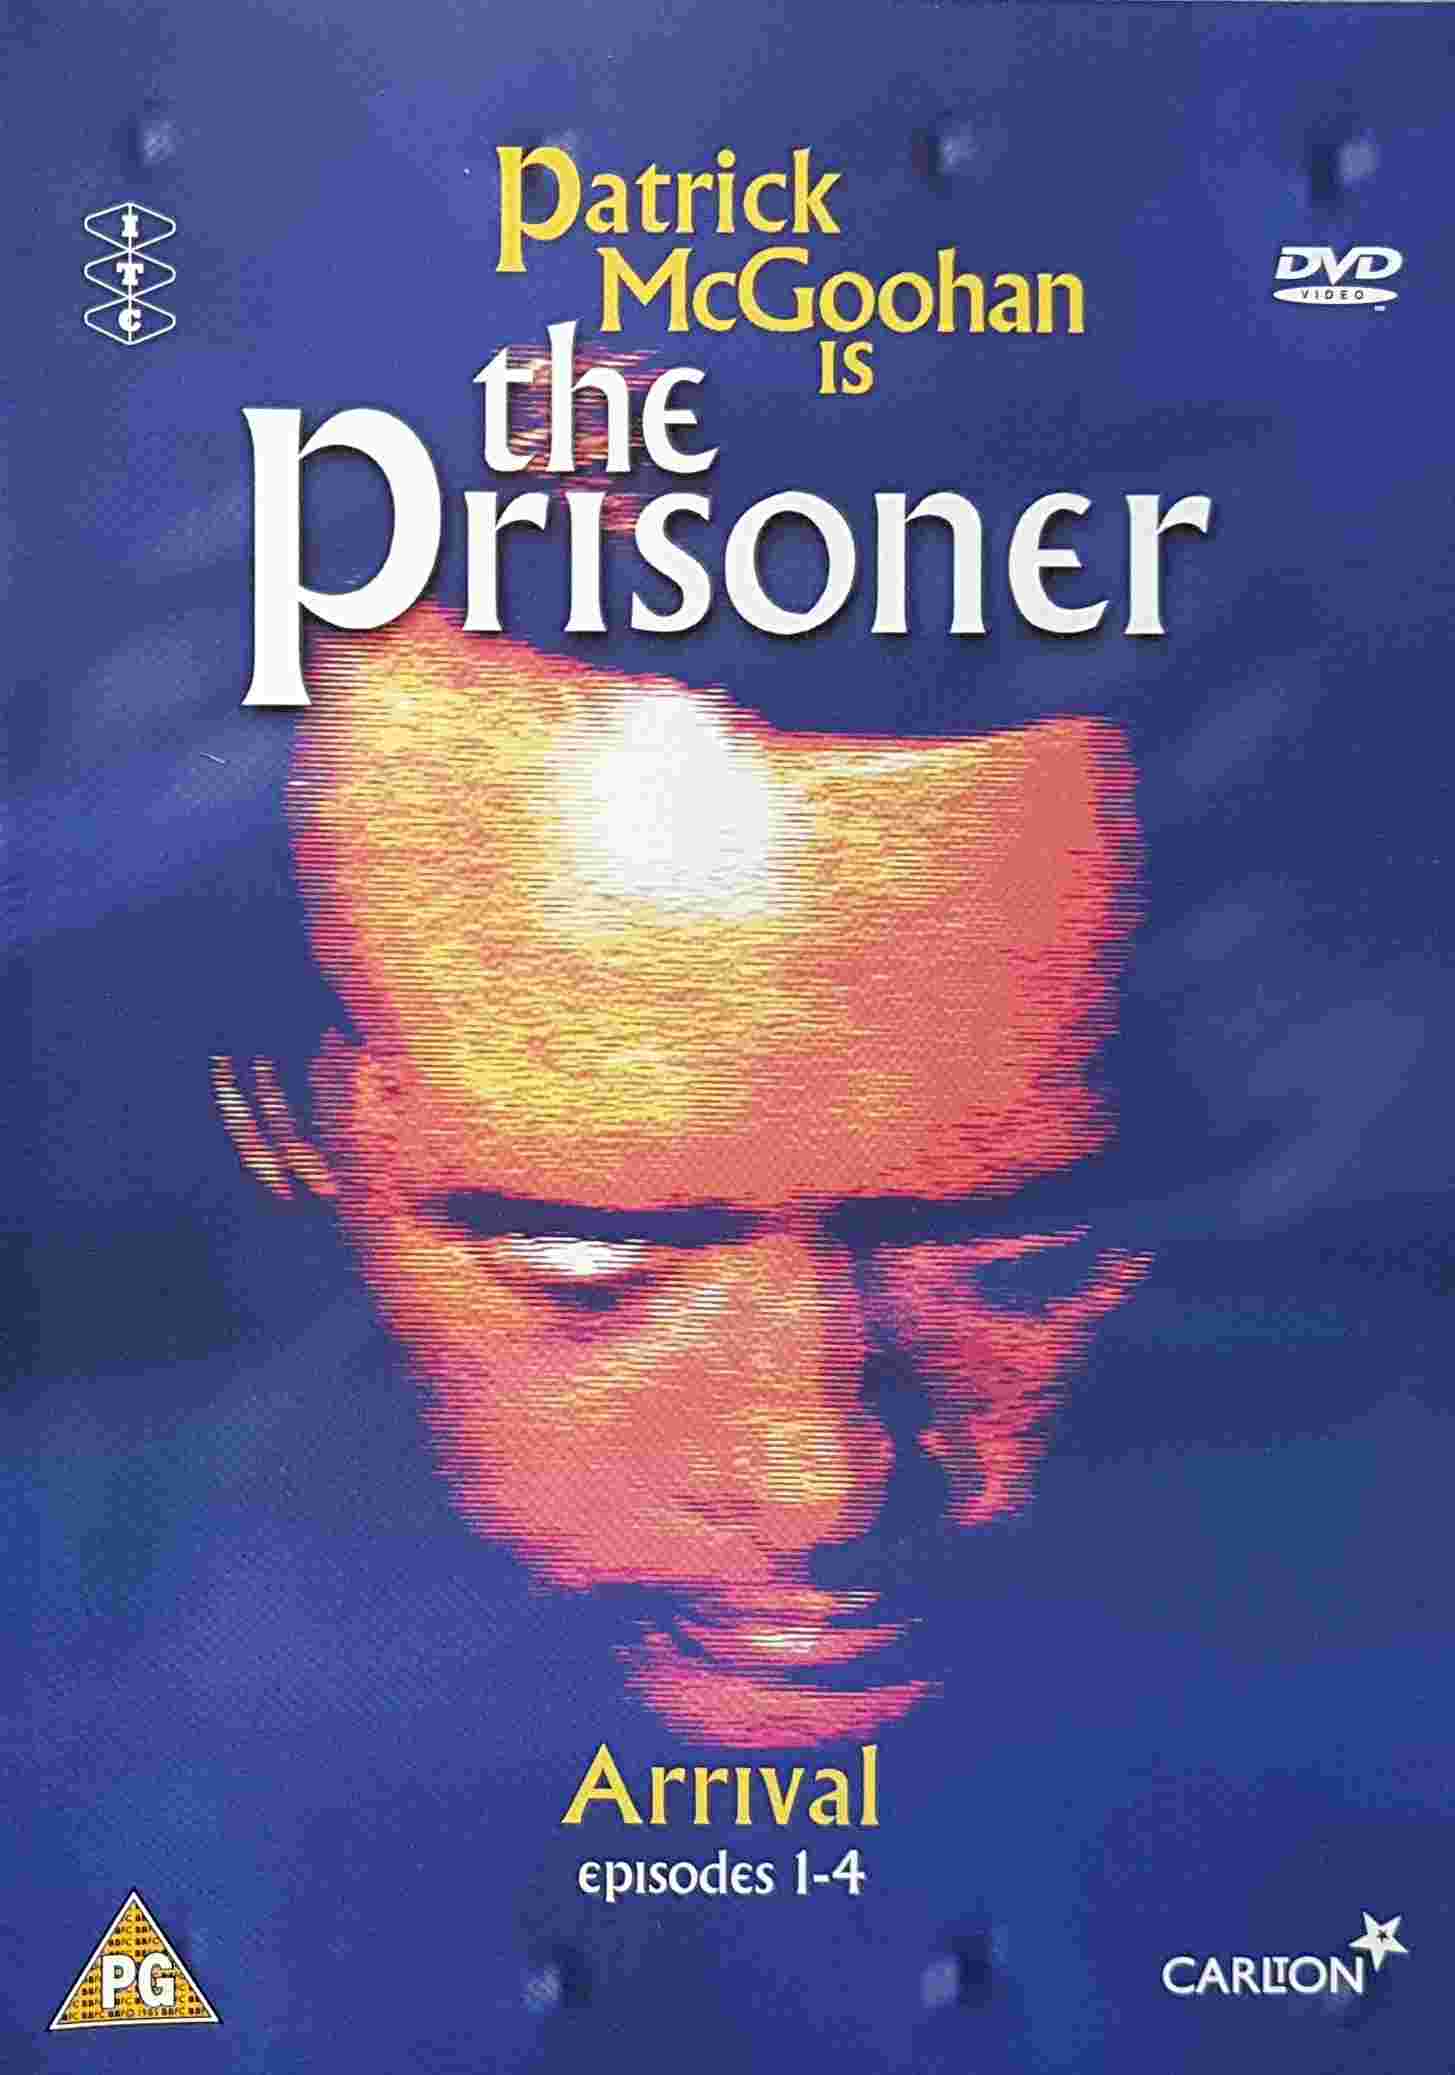 Picture of The prisoner - Episodes 1 - 4 by artist Various from ITV, Channel 4 and Channel 5 dvds library